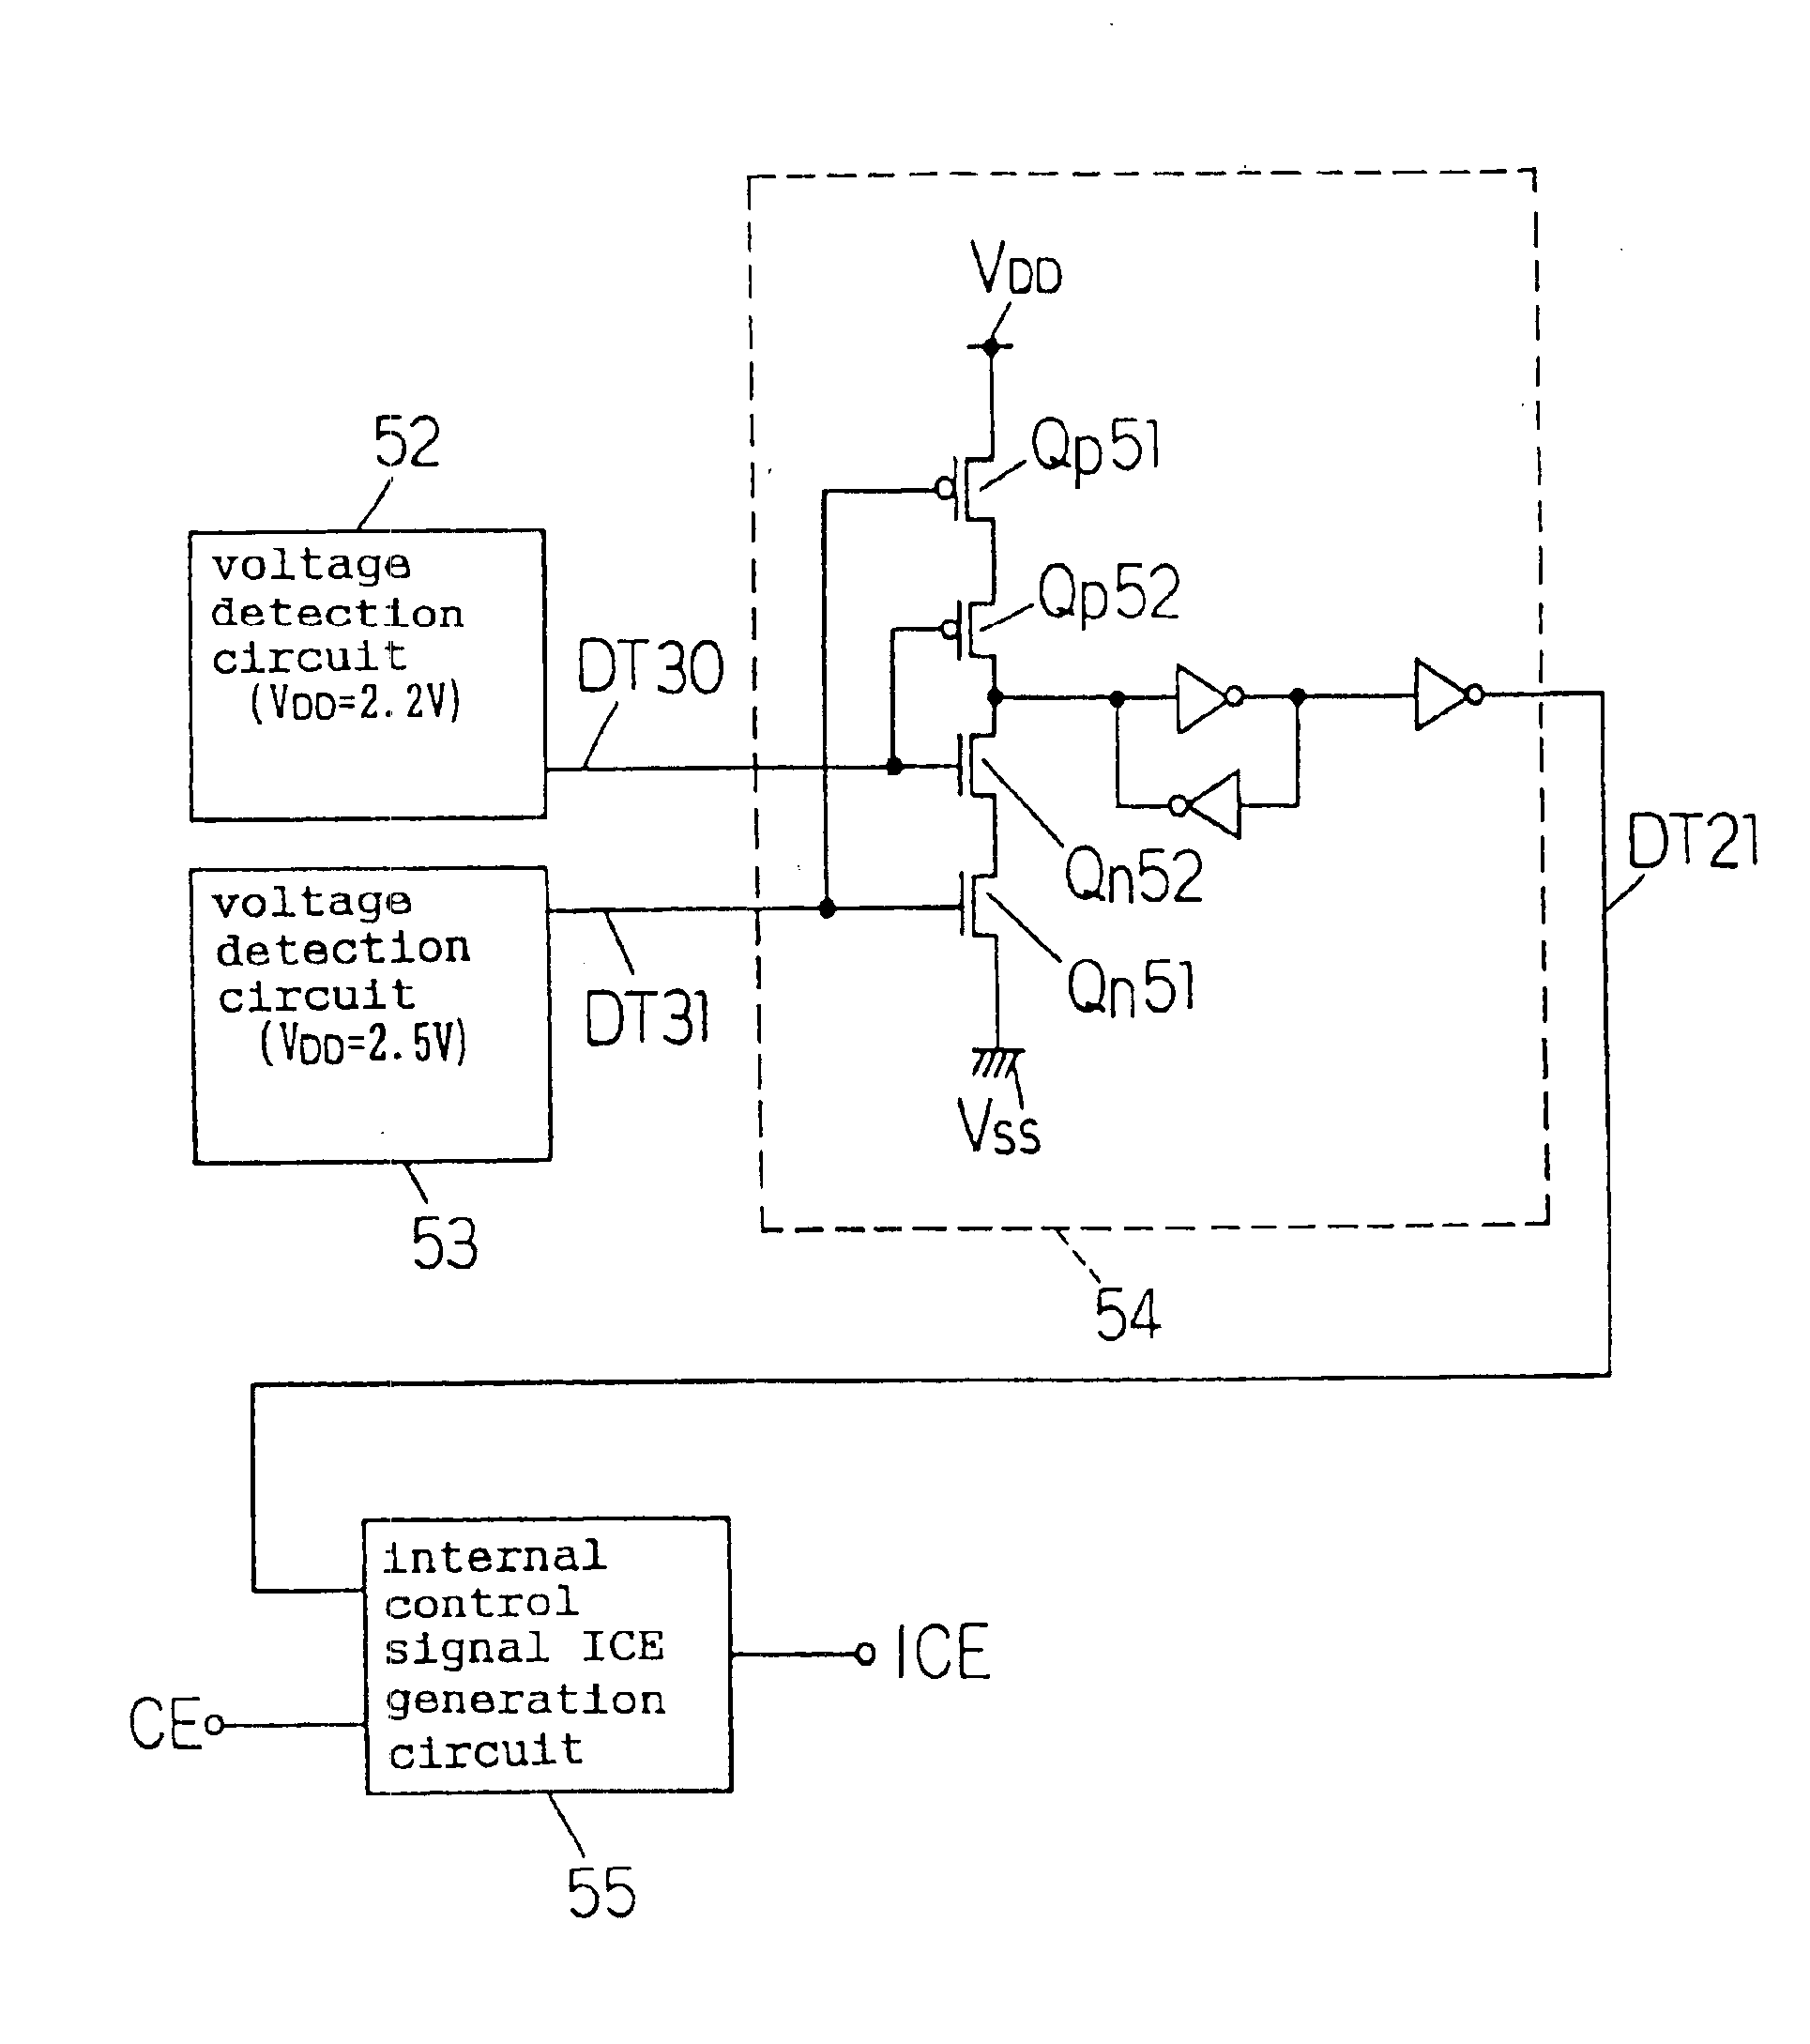 Voltage detection circuit, power-on/off reset circuit, and semiconductor device